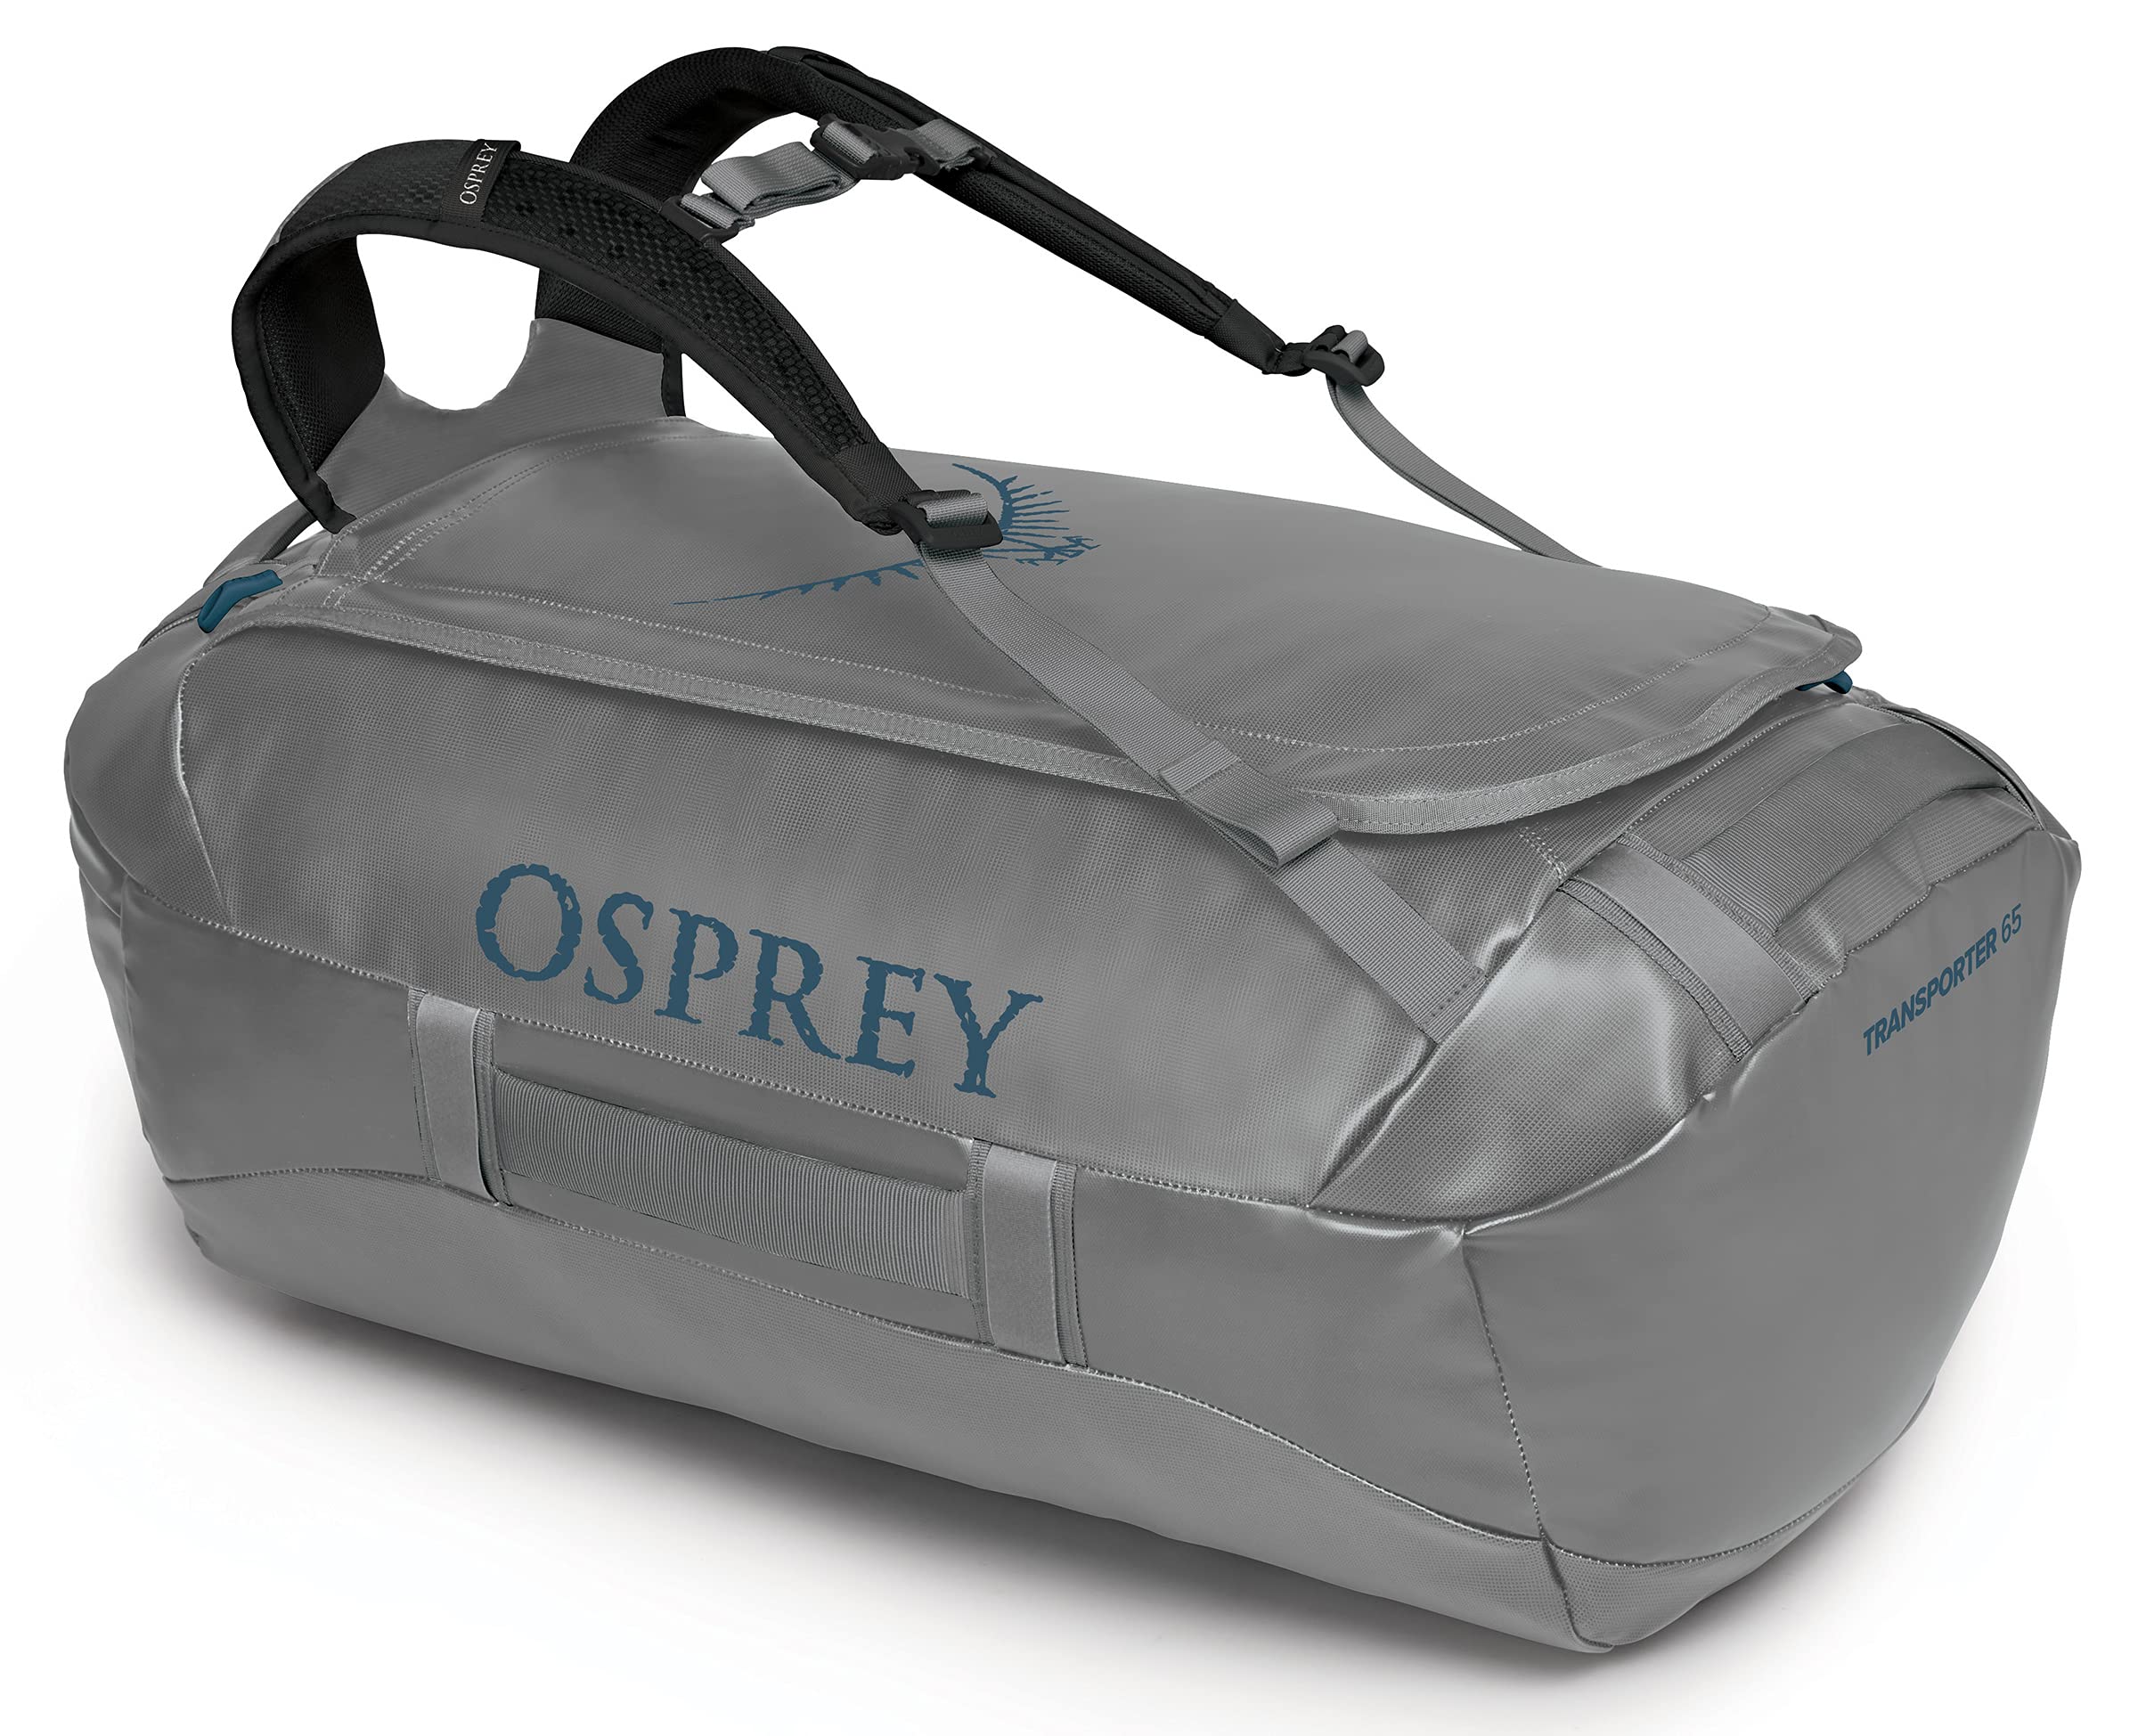 Osprey Packs Transporter 65 Expedition Duffel – Luggage Online